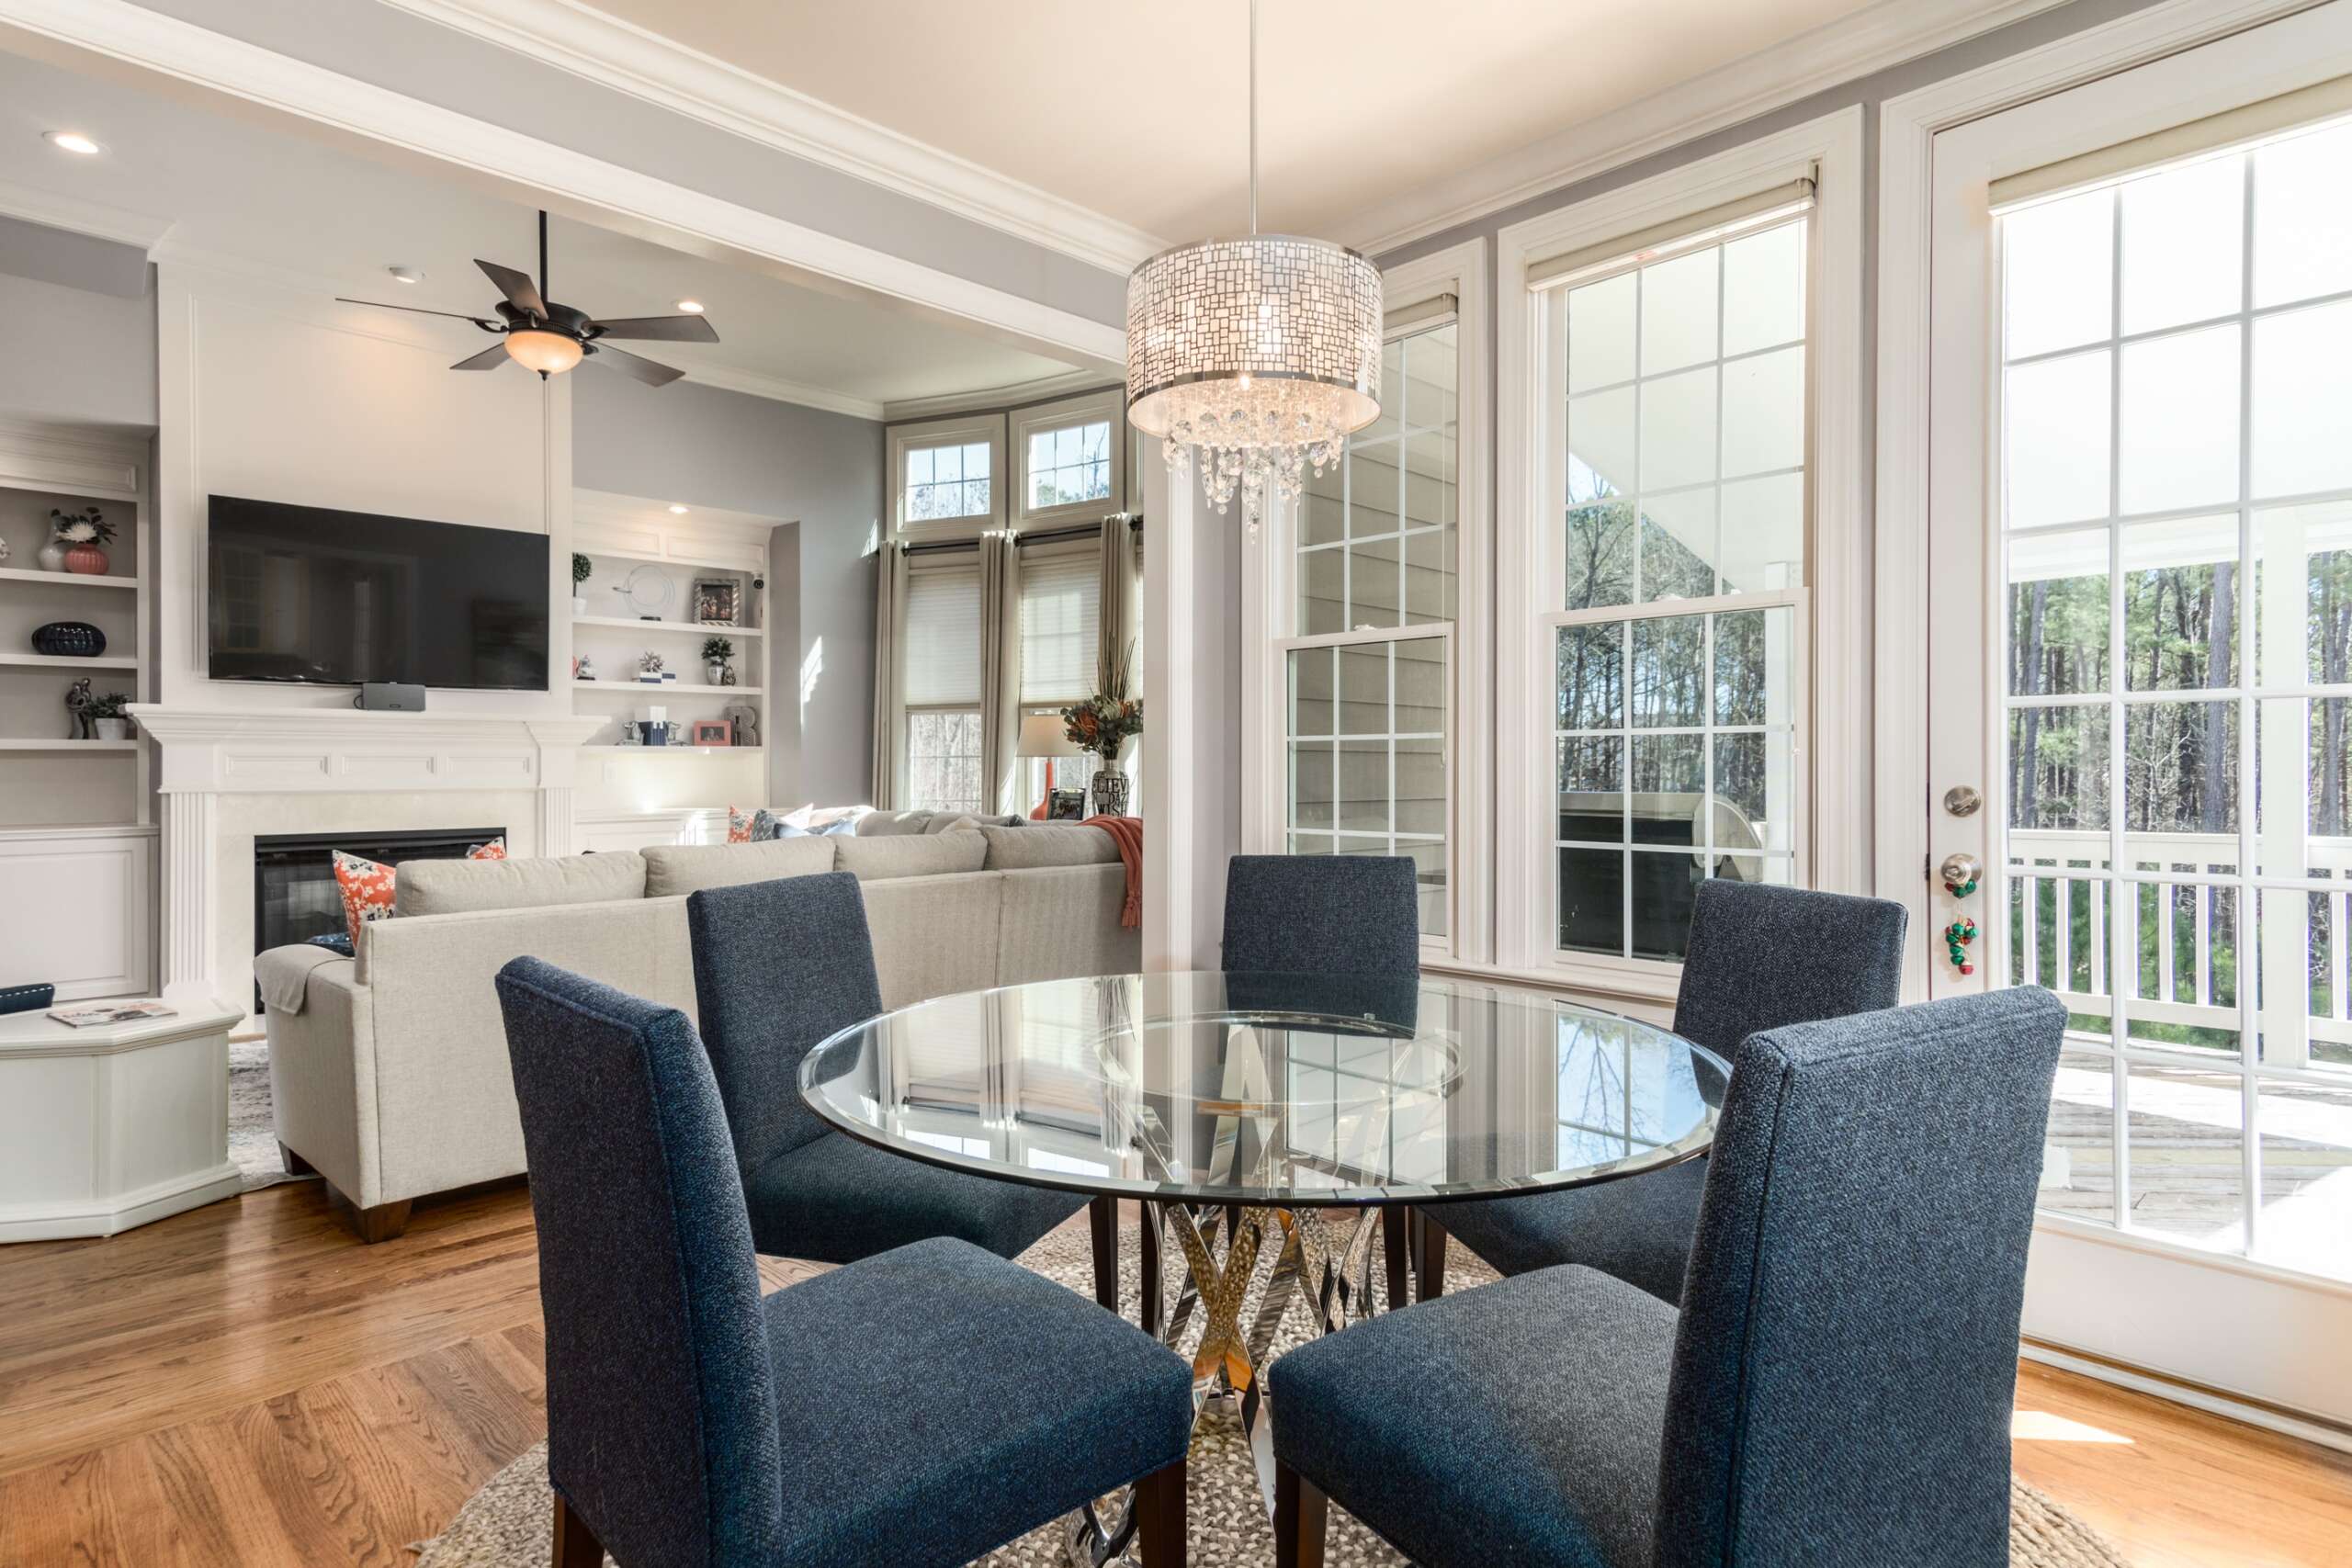 Round glass table with 5 chairs on the living room